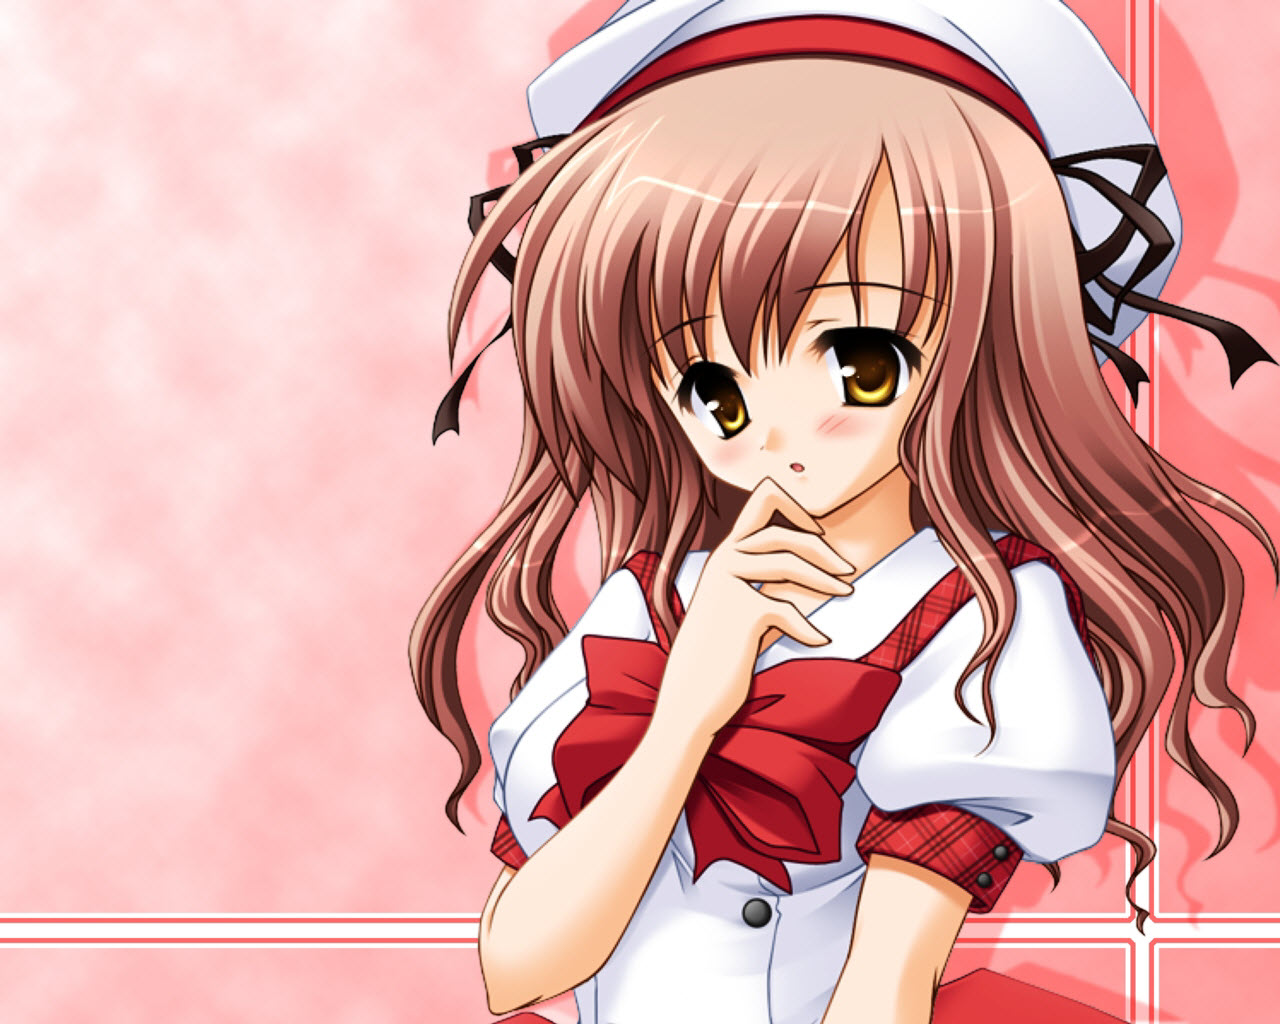  Wallpapers Backgrounds 6 Cute Anime Girl Wallpapers for Desktop 1280x1024